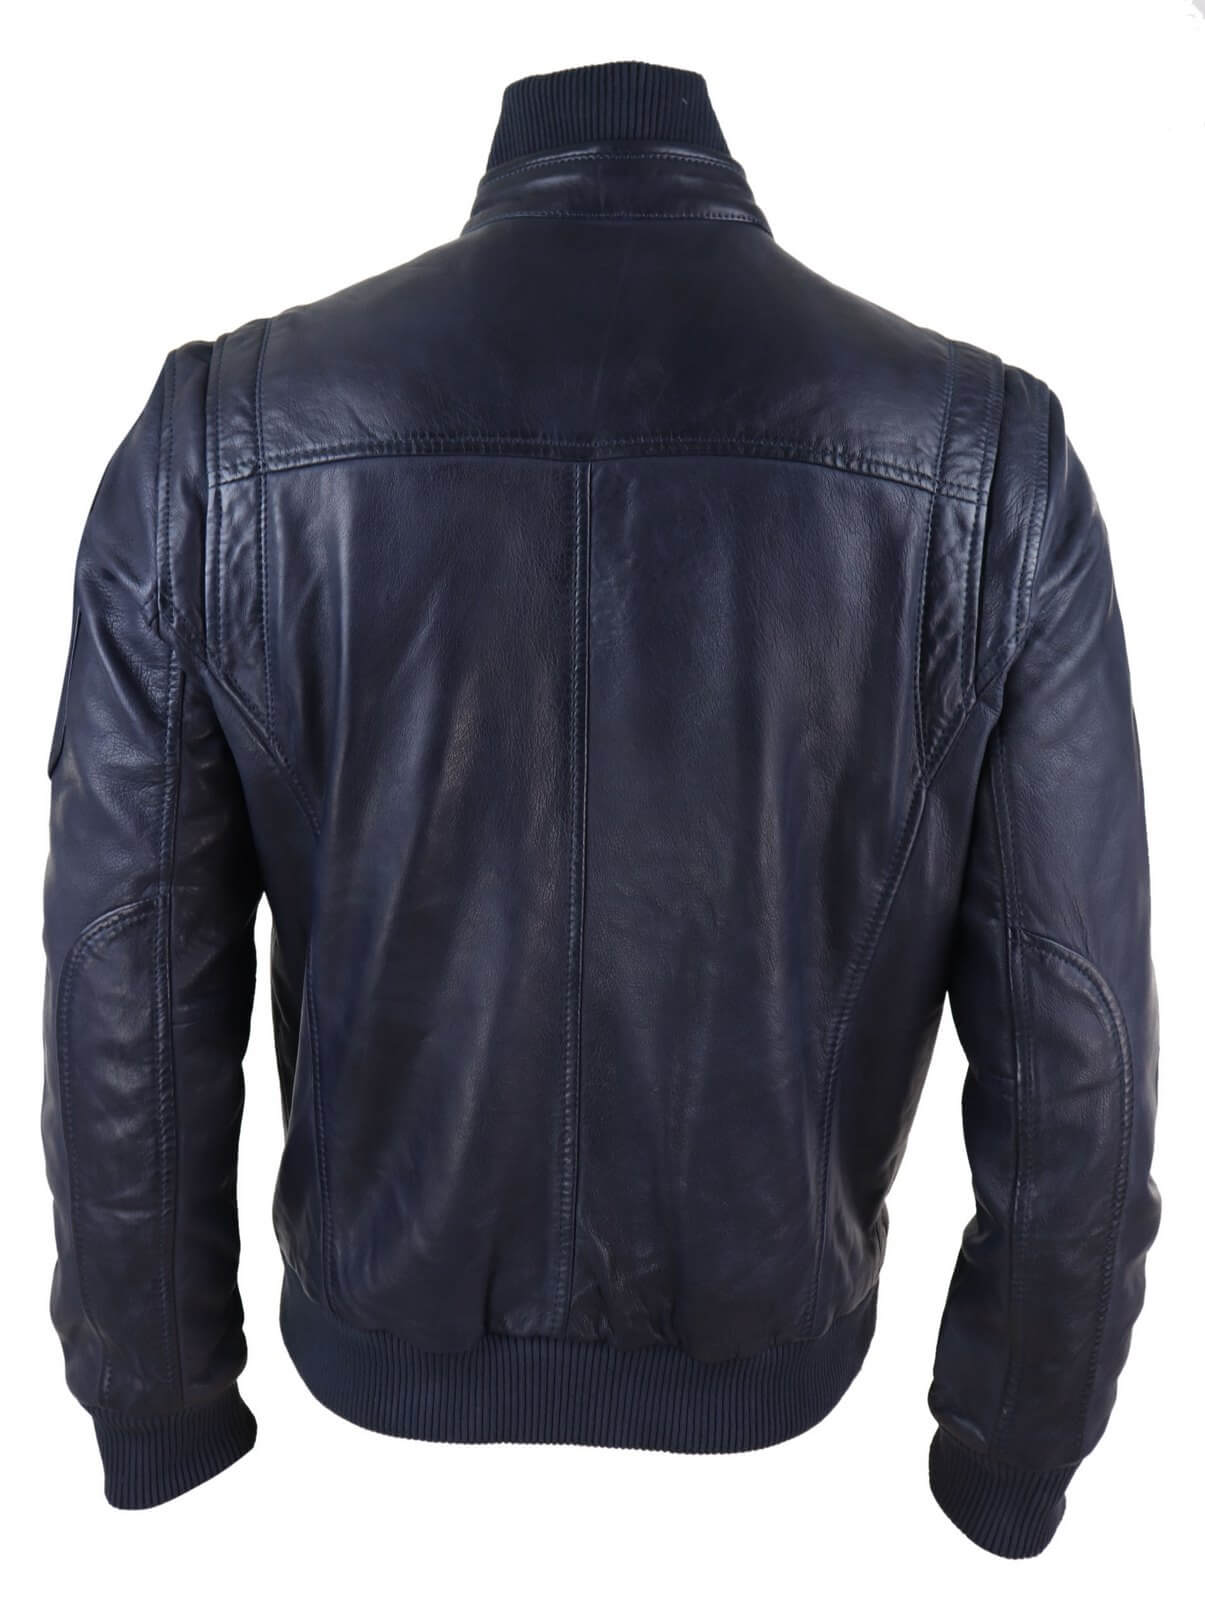 Real Leather Autumn Jacket with High Neck for Mens - Navy Color: Buy ...